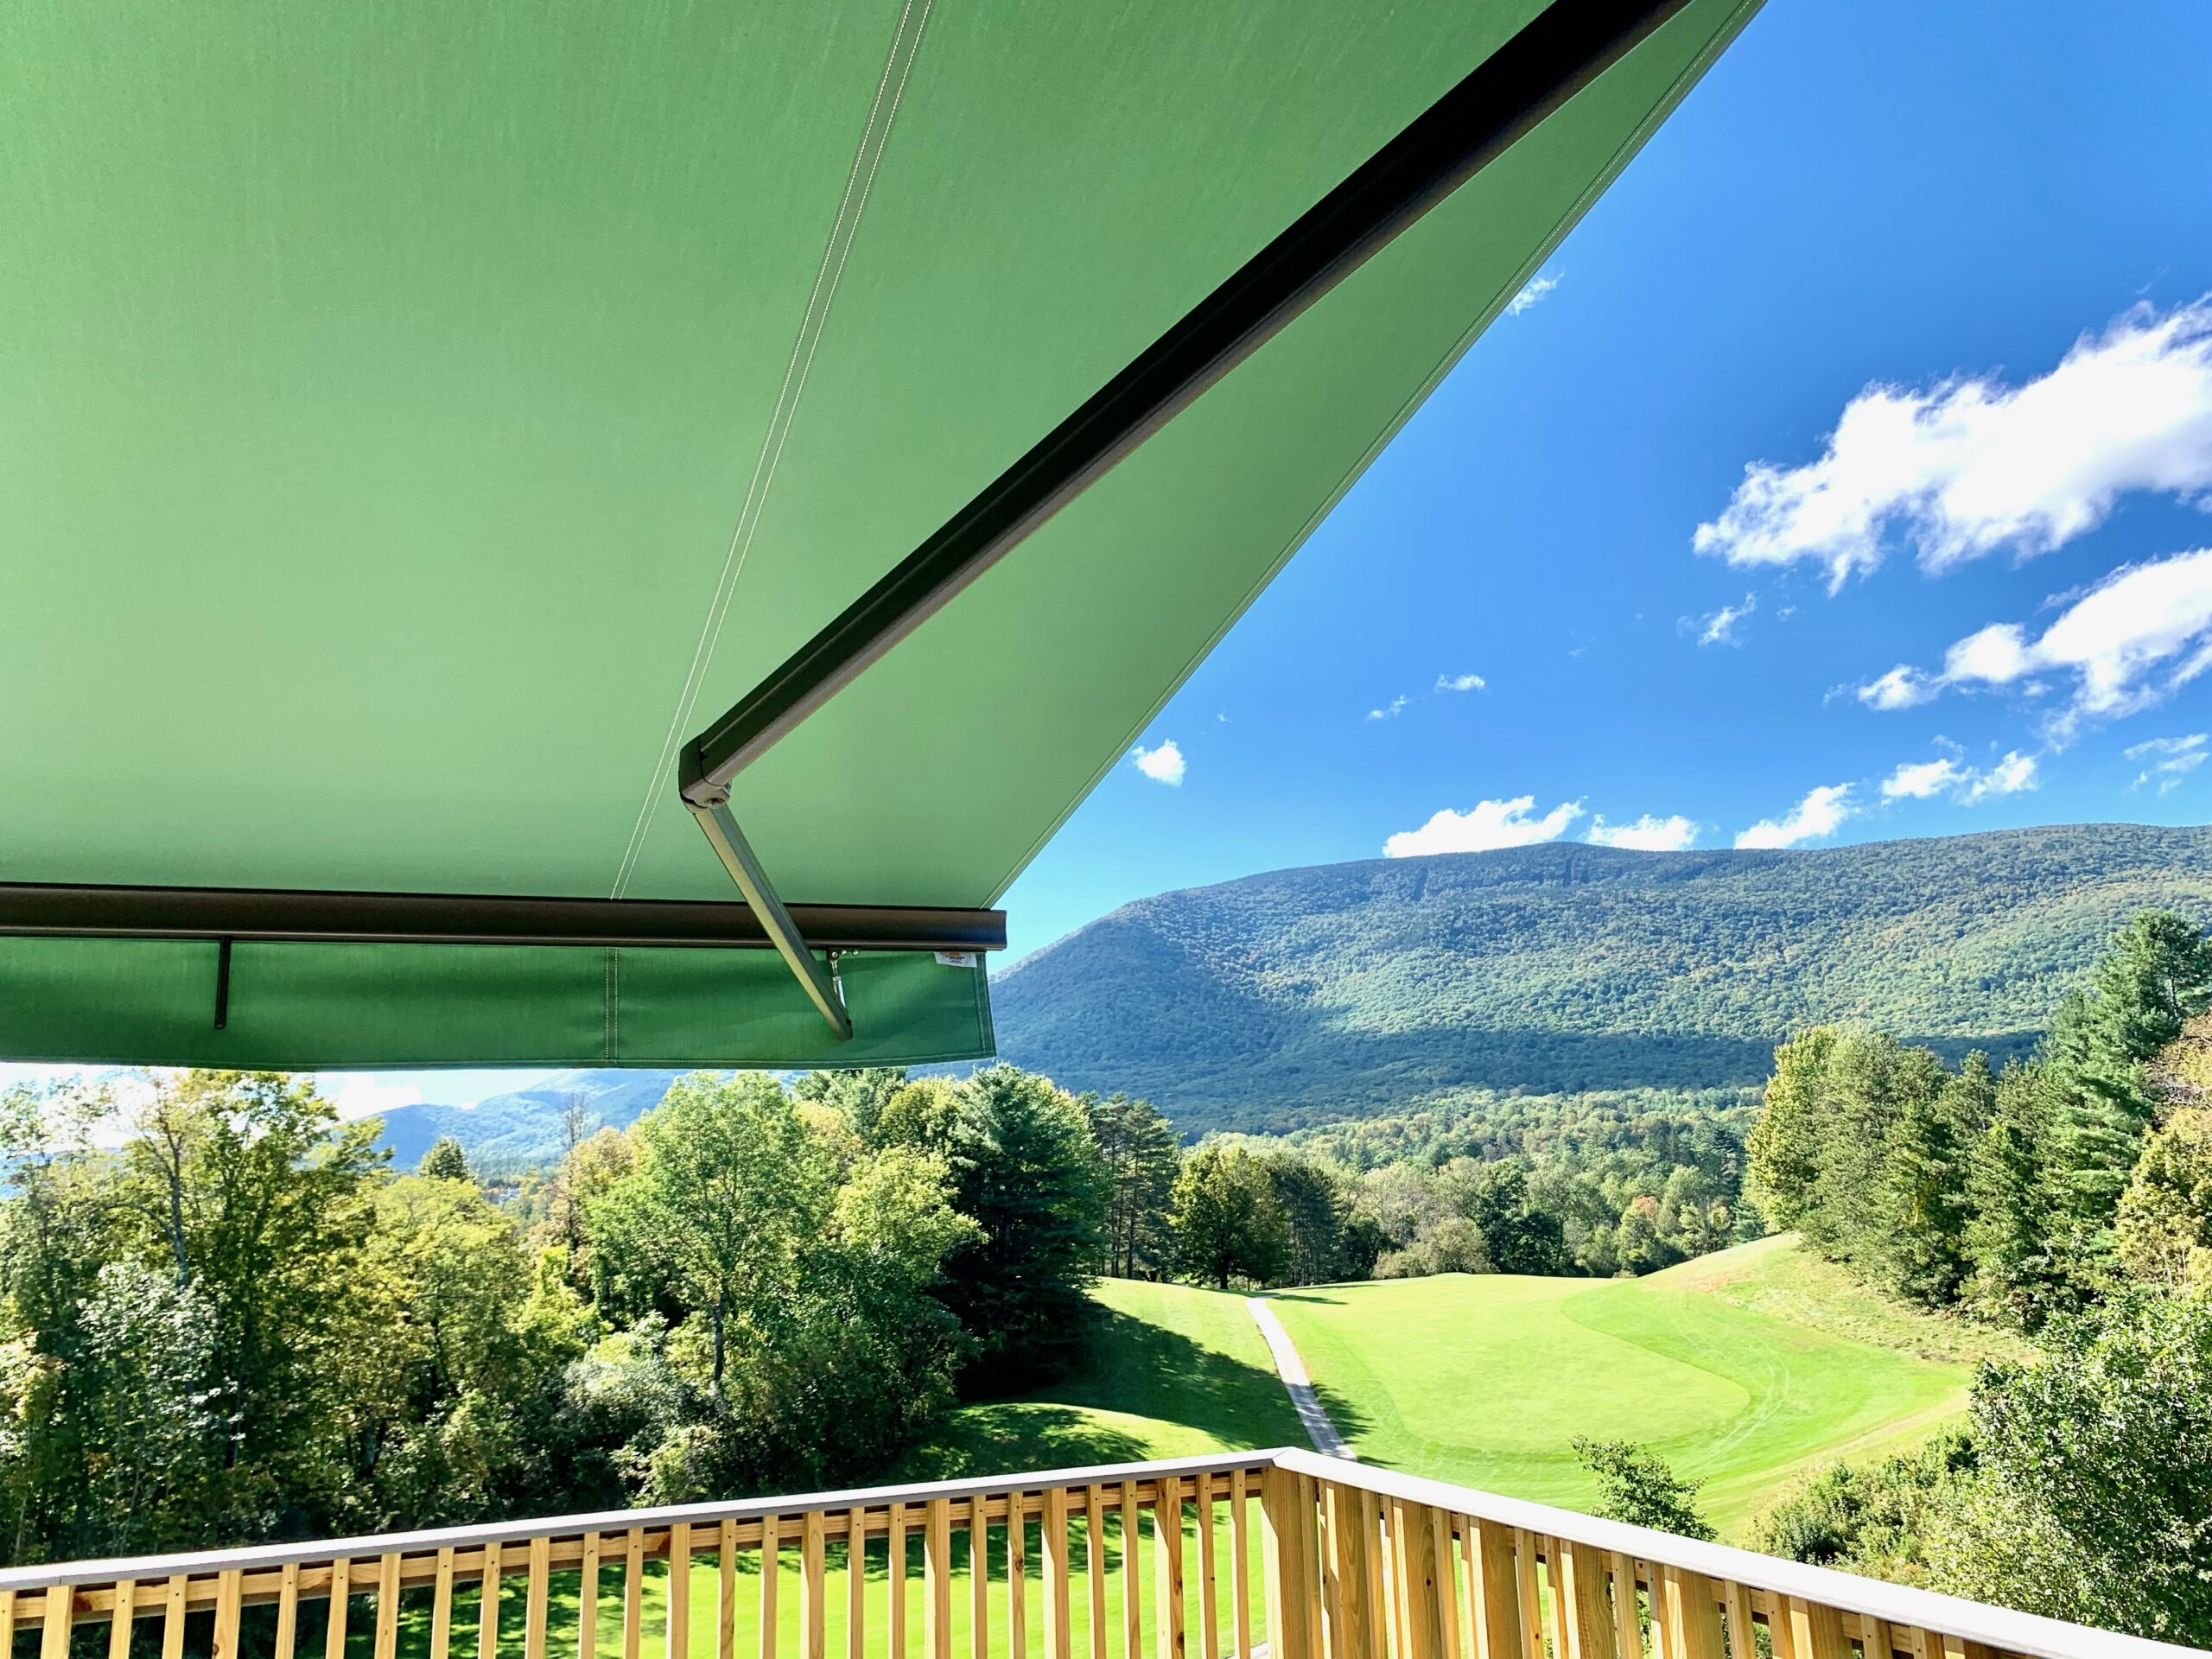 Green retractable awning overlooking the green mountains